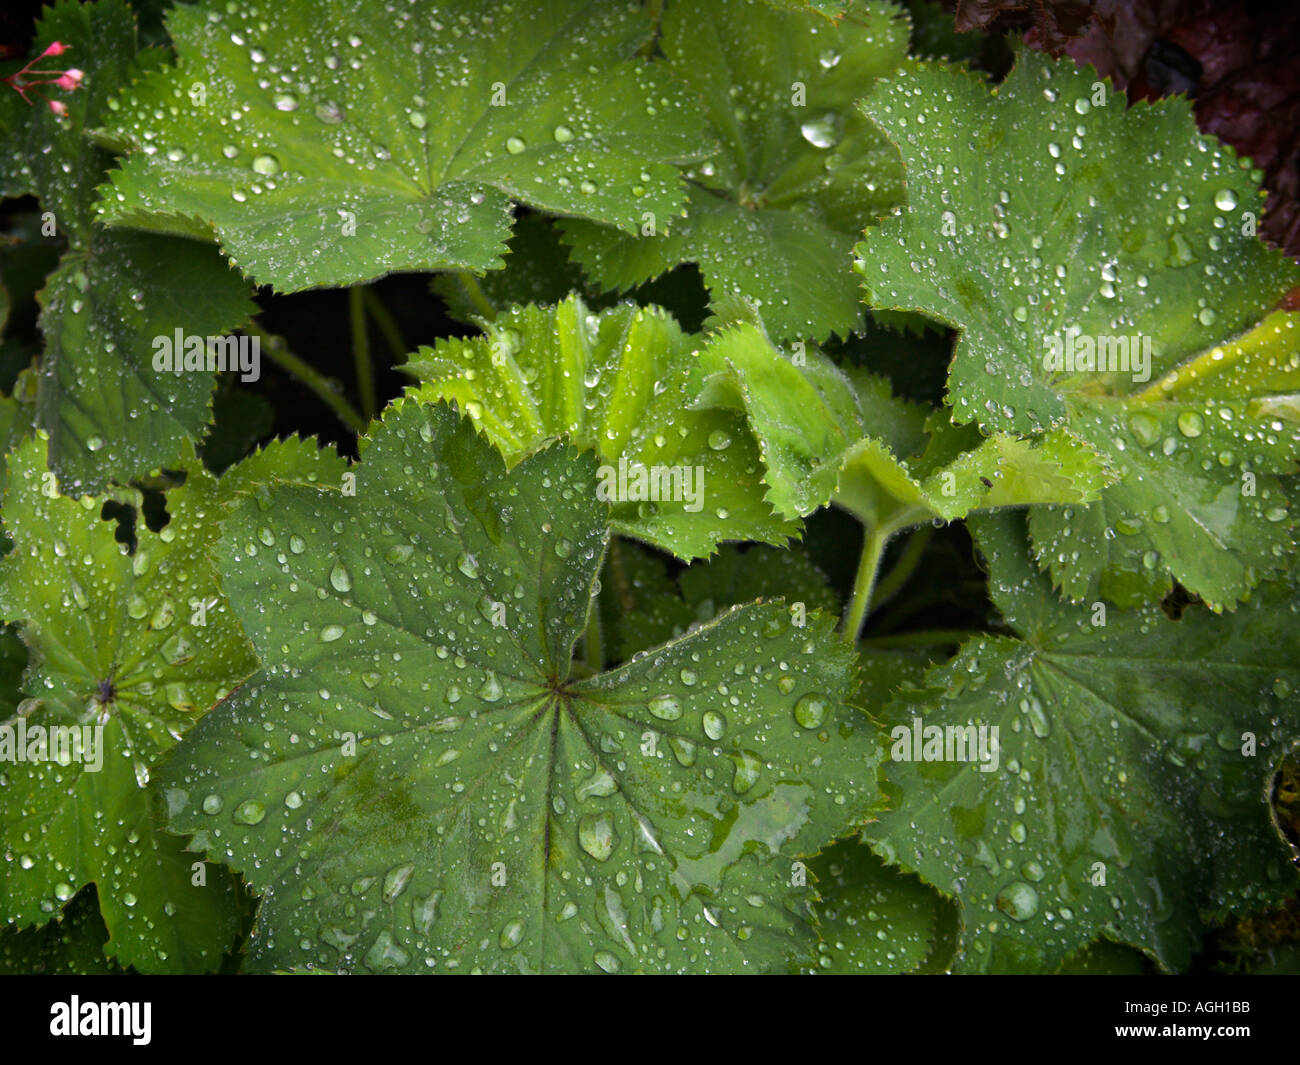 Alchemilla Mollis or Ladys Mantle with dewdrops Stock Photo